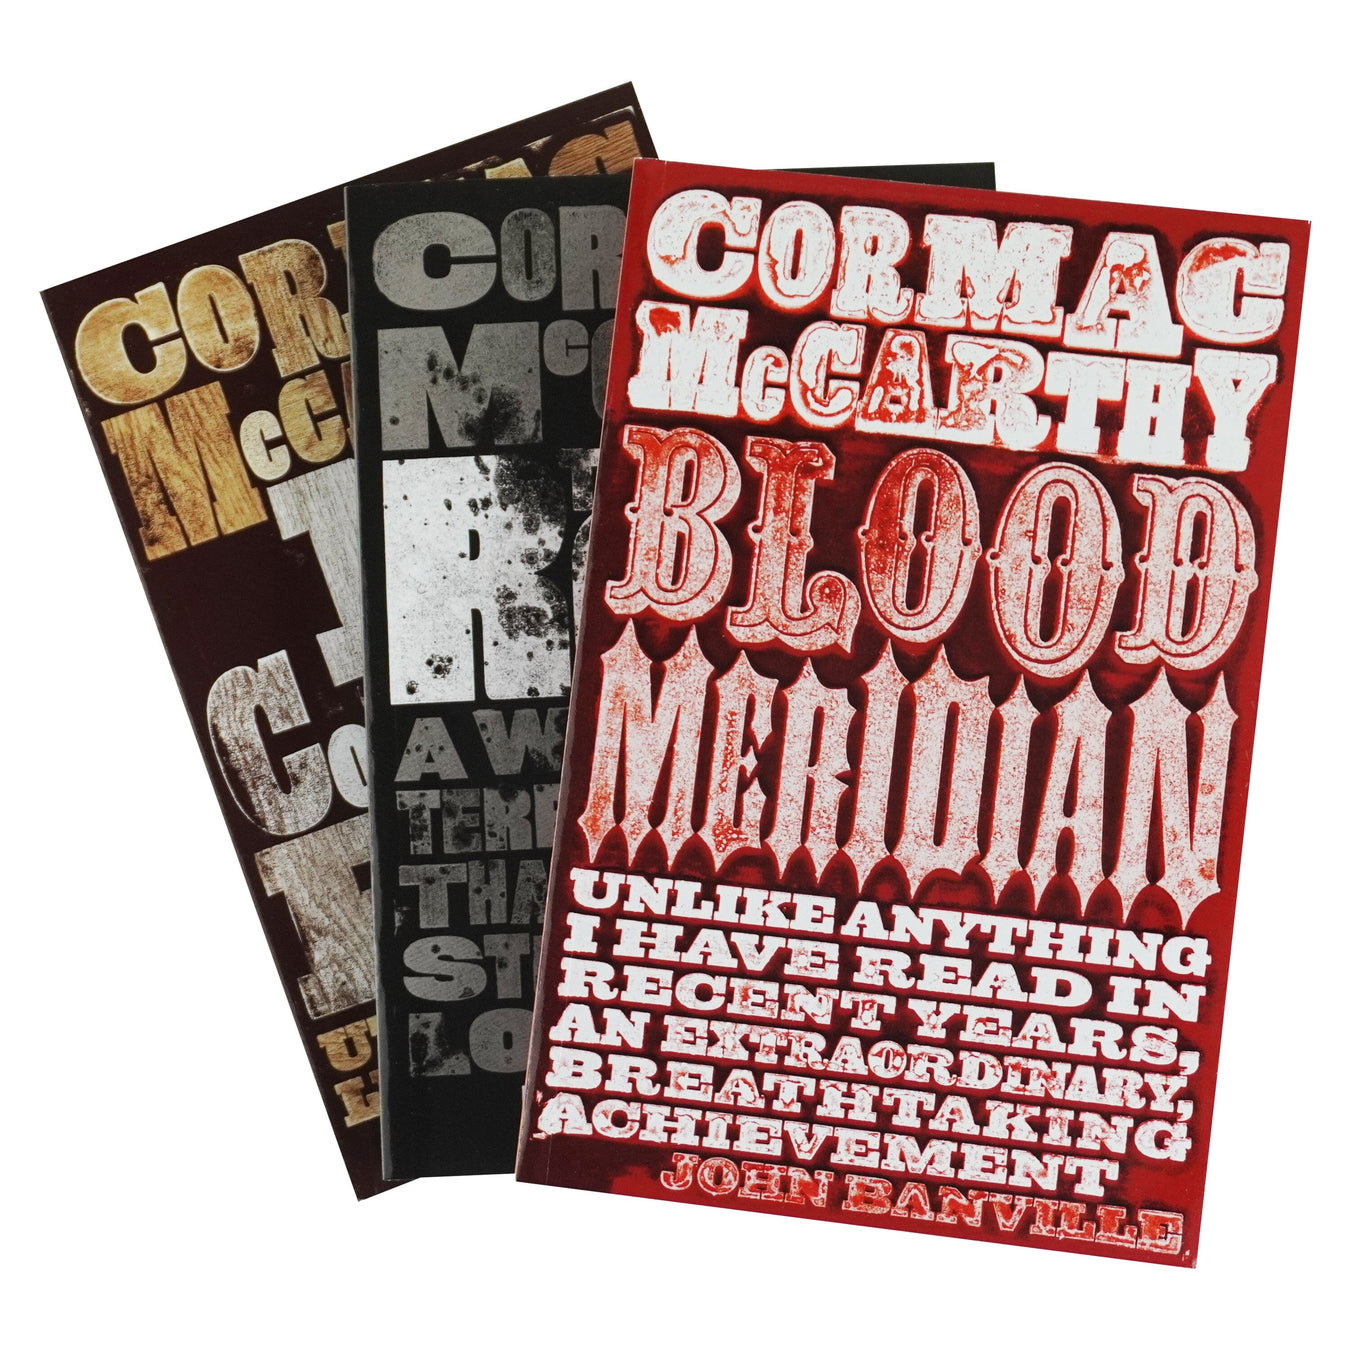 Cormac McCarthy 3 Books Collection Set (The Road, Blood Meridian & No Country for Old Men) - Fiction - Paperback B2D DEALS Picador